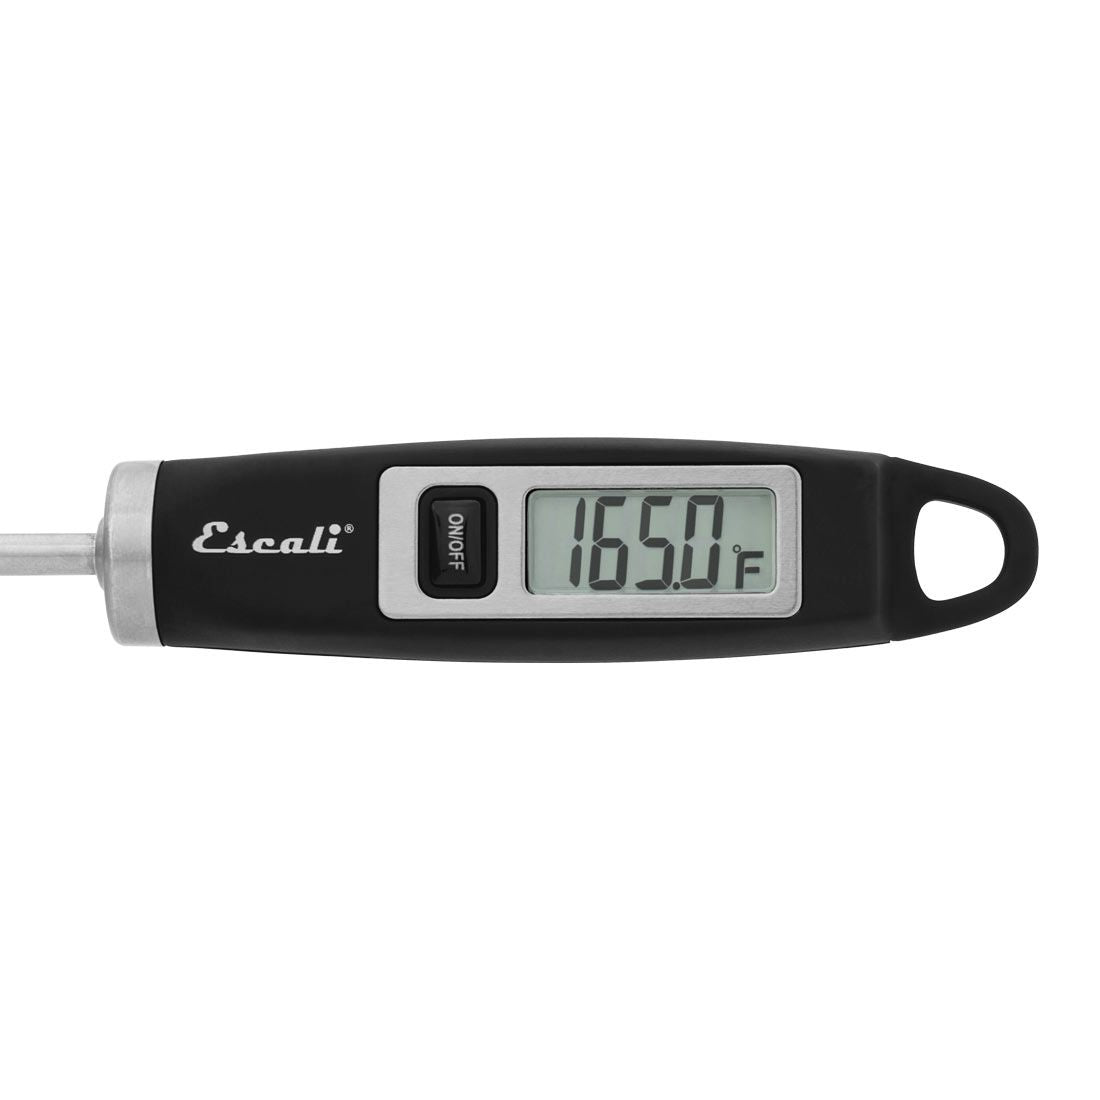 Escali Oven Thermometer – The Seasoned Gourmet